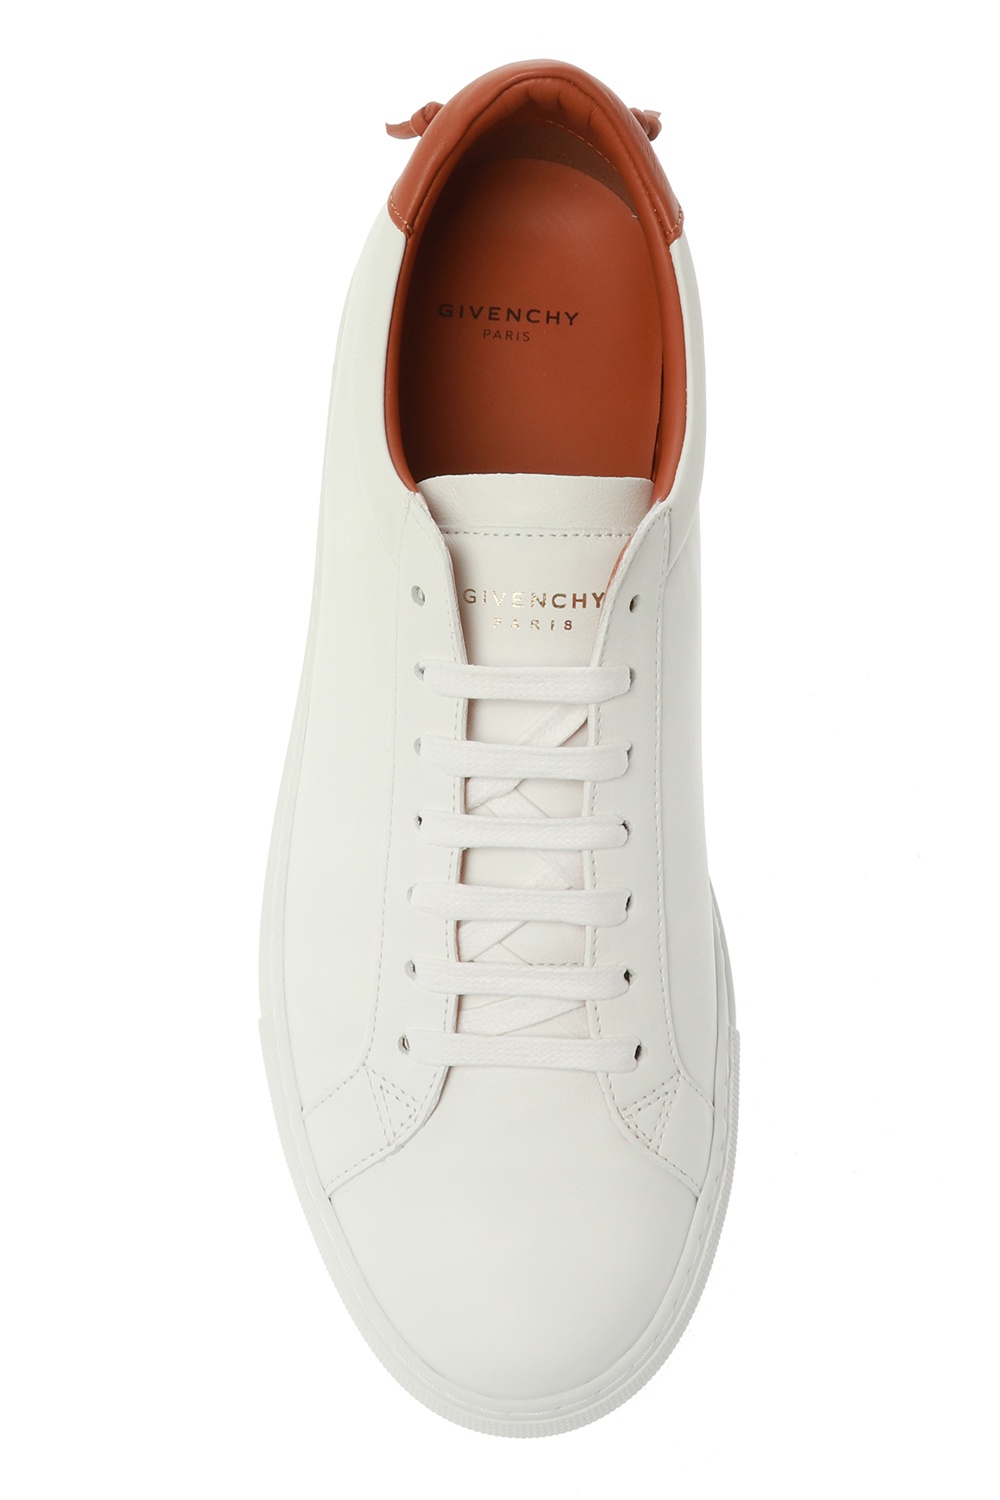 White 'Urban Street' leather sneakers Givenchy - Vitkac France